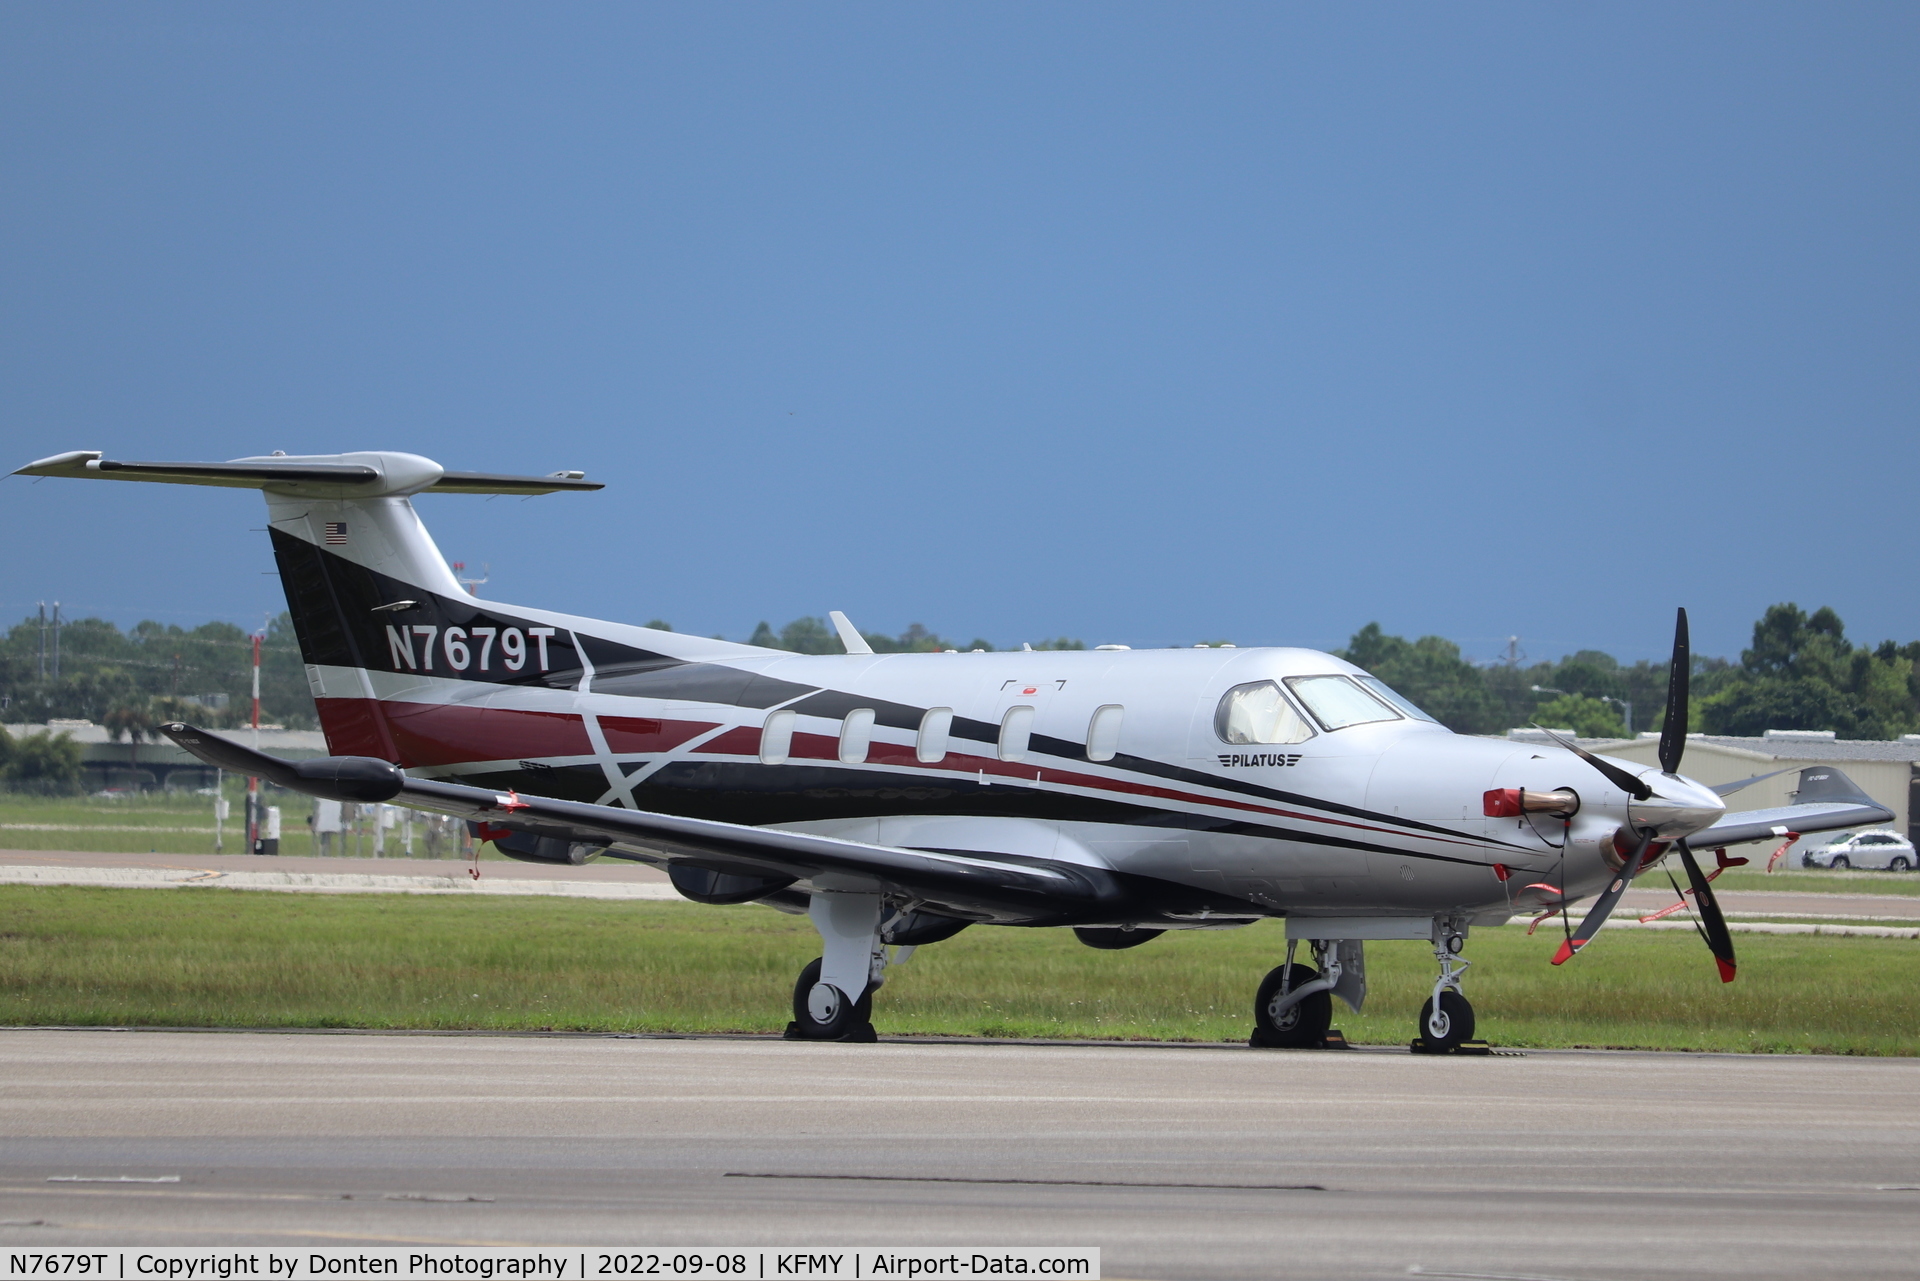 N7679T, 2015 Pilatus PC-12/47E C/N 1517, Pilatus PC-12 parked on the Base Ops ramp at Page Field